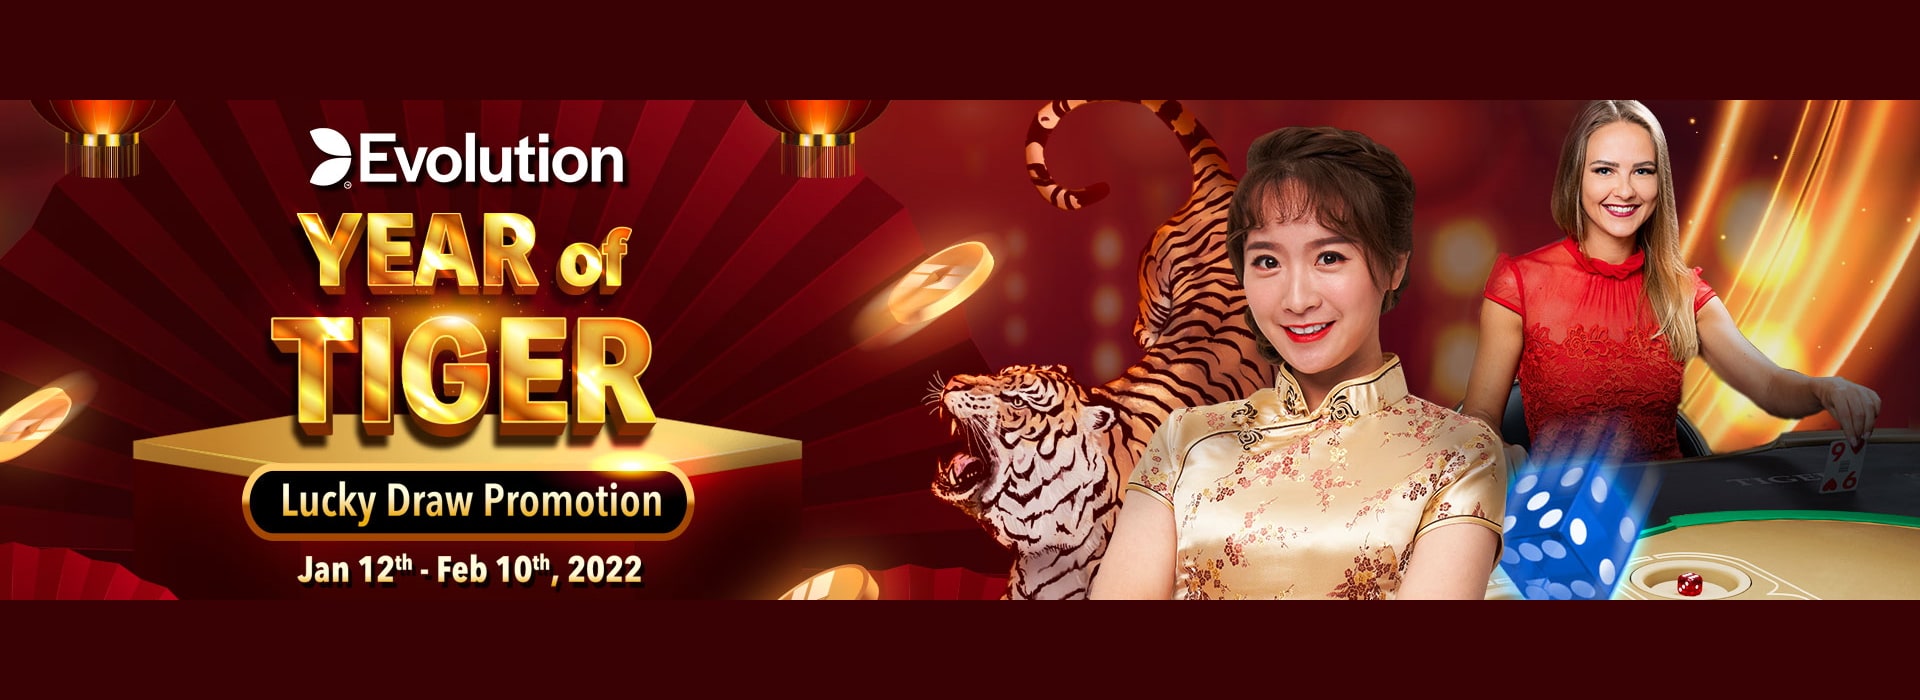 Evolution Year of Tiger Lucky Draw